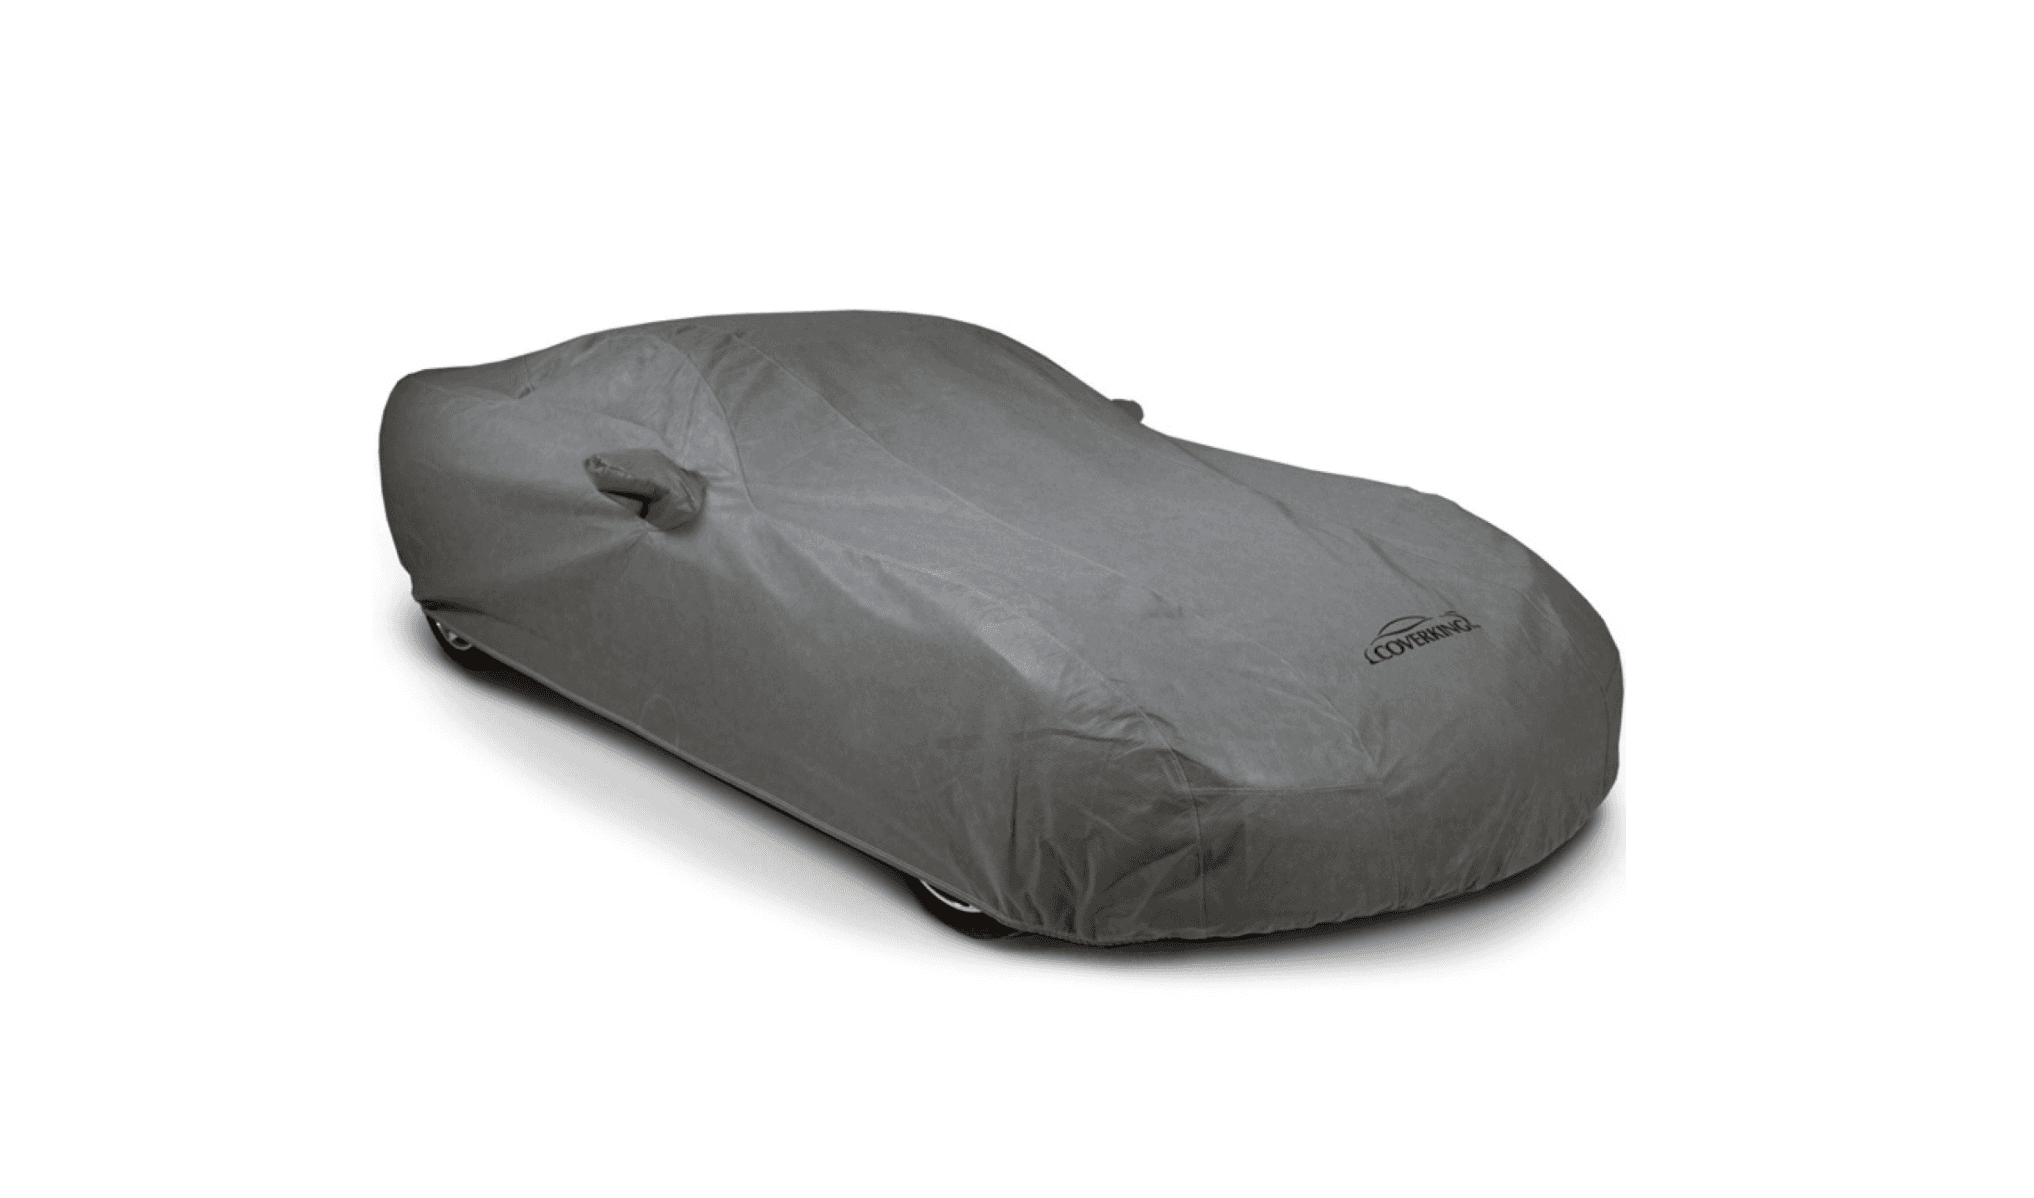 Coverking Triguard Car Cover in gray